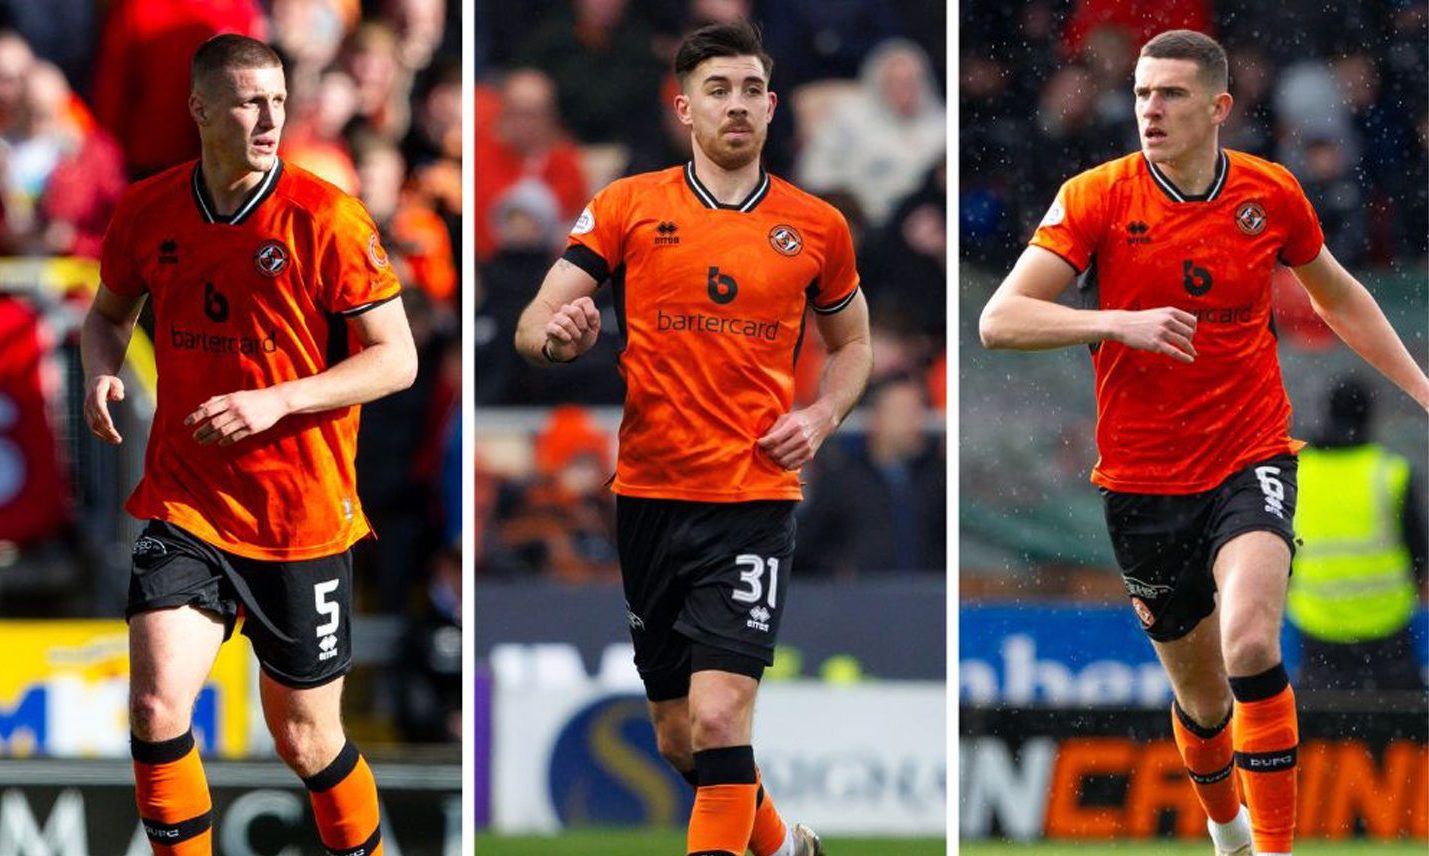 Dundee United trio Sam McClelland, left, Declan Gallagher, centre, and Ross Graham